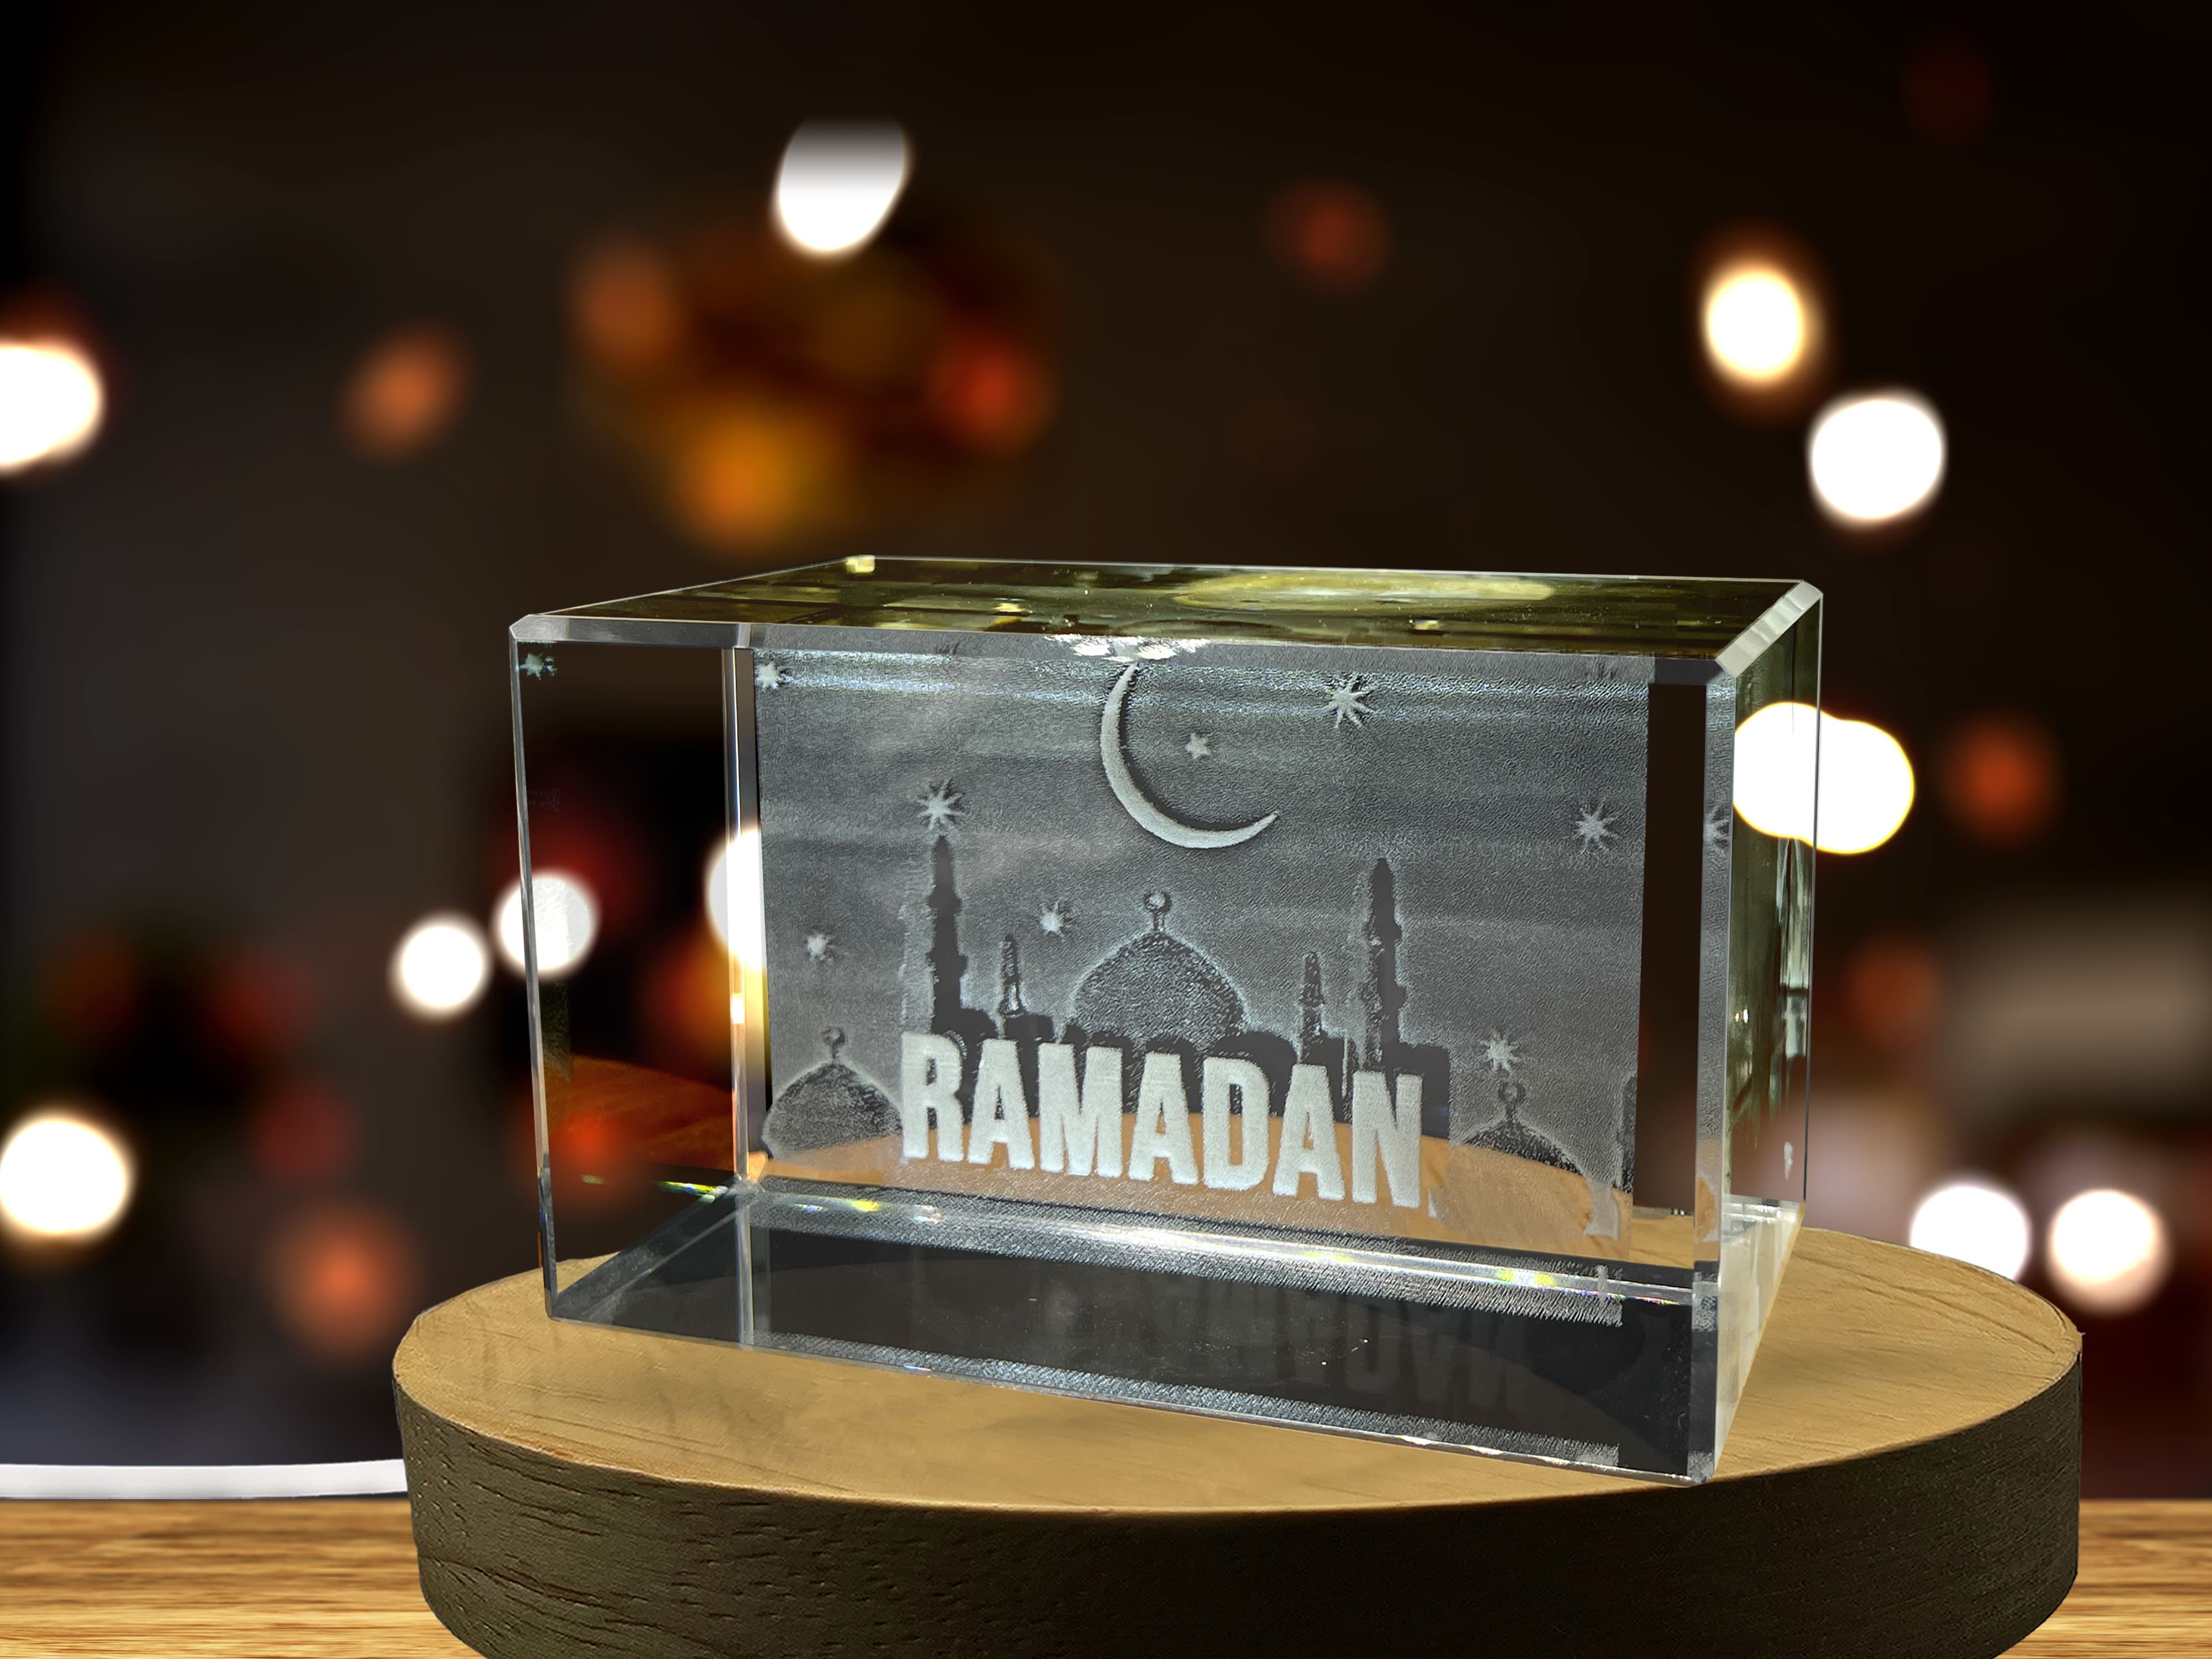 Ramadan| 3D-Engraved-Crystal-Keepsake | Gift/Decor| Collectible | Souvenir | personalized-3D-crystal-photo-gift |Customized-3d-photo-Engraved-Crystal | Home-decor A&B Crystal Collection